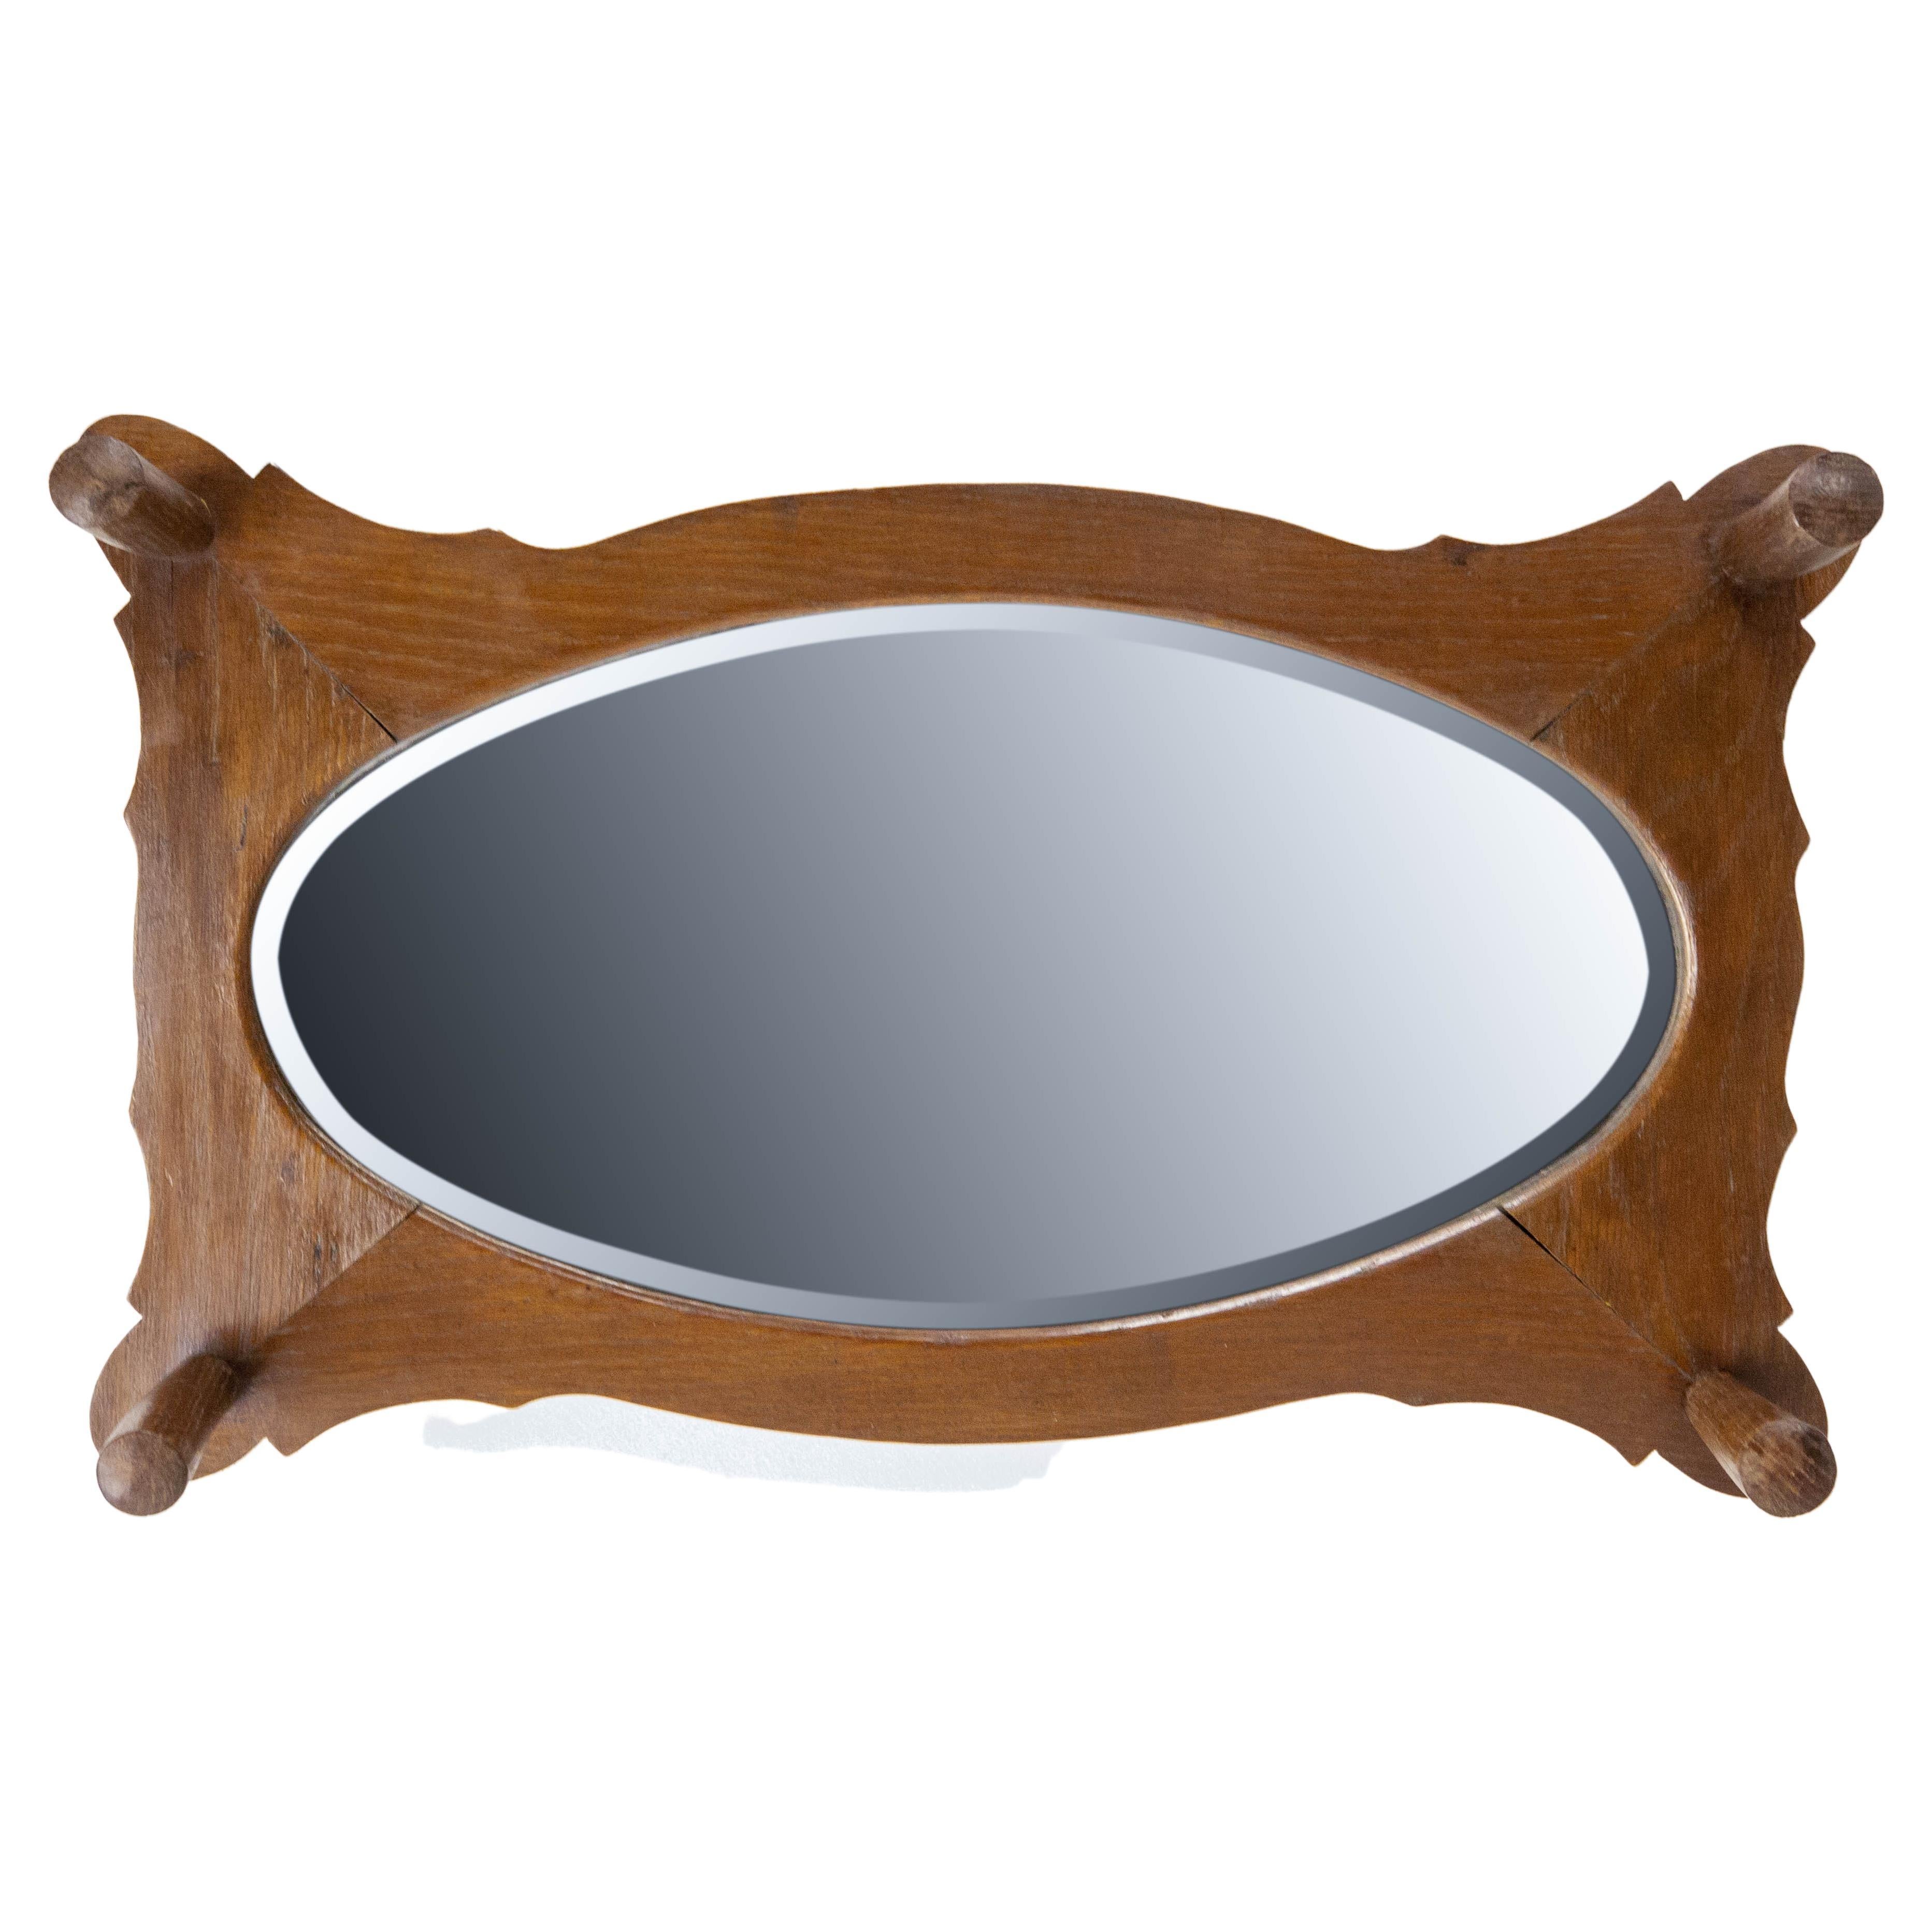 Entry Coat Rack Porte Manteau Oval Beveled Mirror French, Early 20th Century For Sale